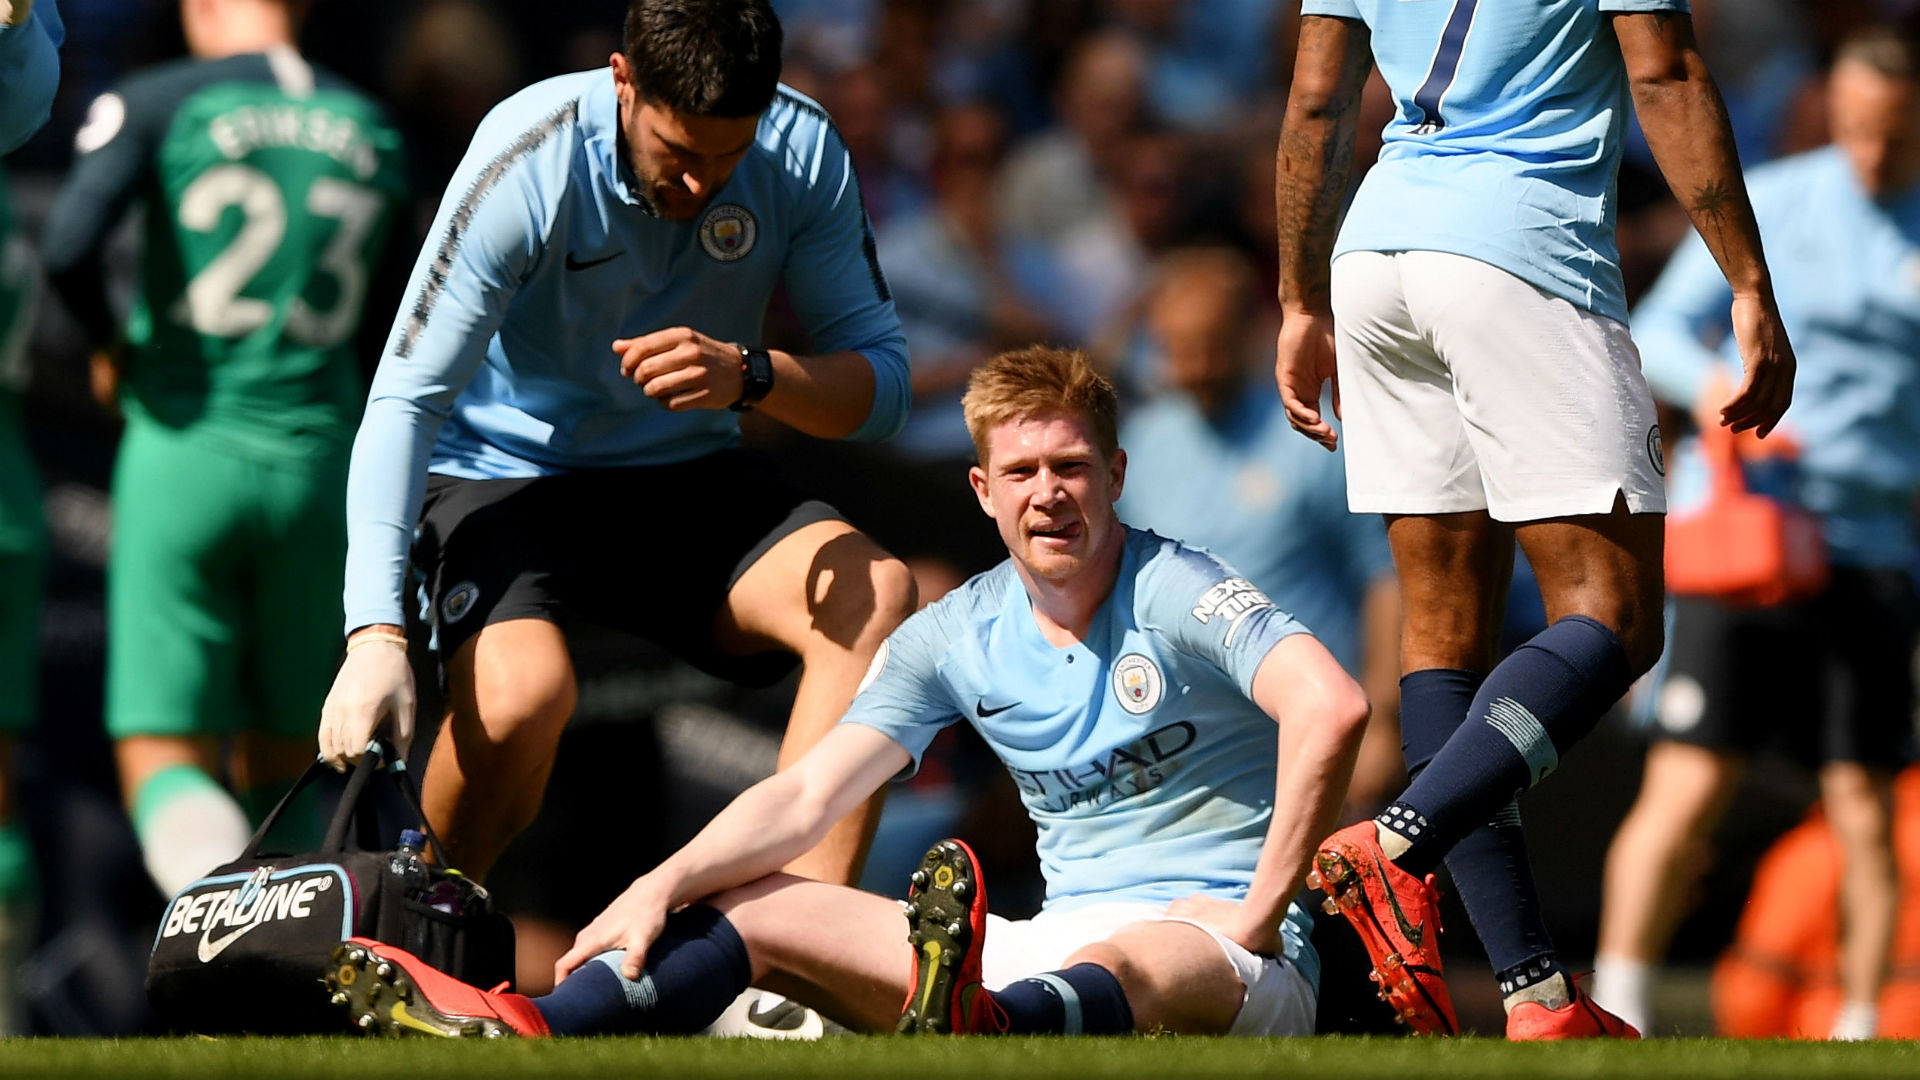 Manchester City's title challenge suffered a setback as Kevin De Bruyne sustained another injury against Tottenham on Saturday.